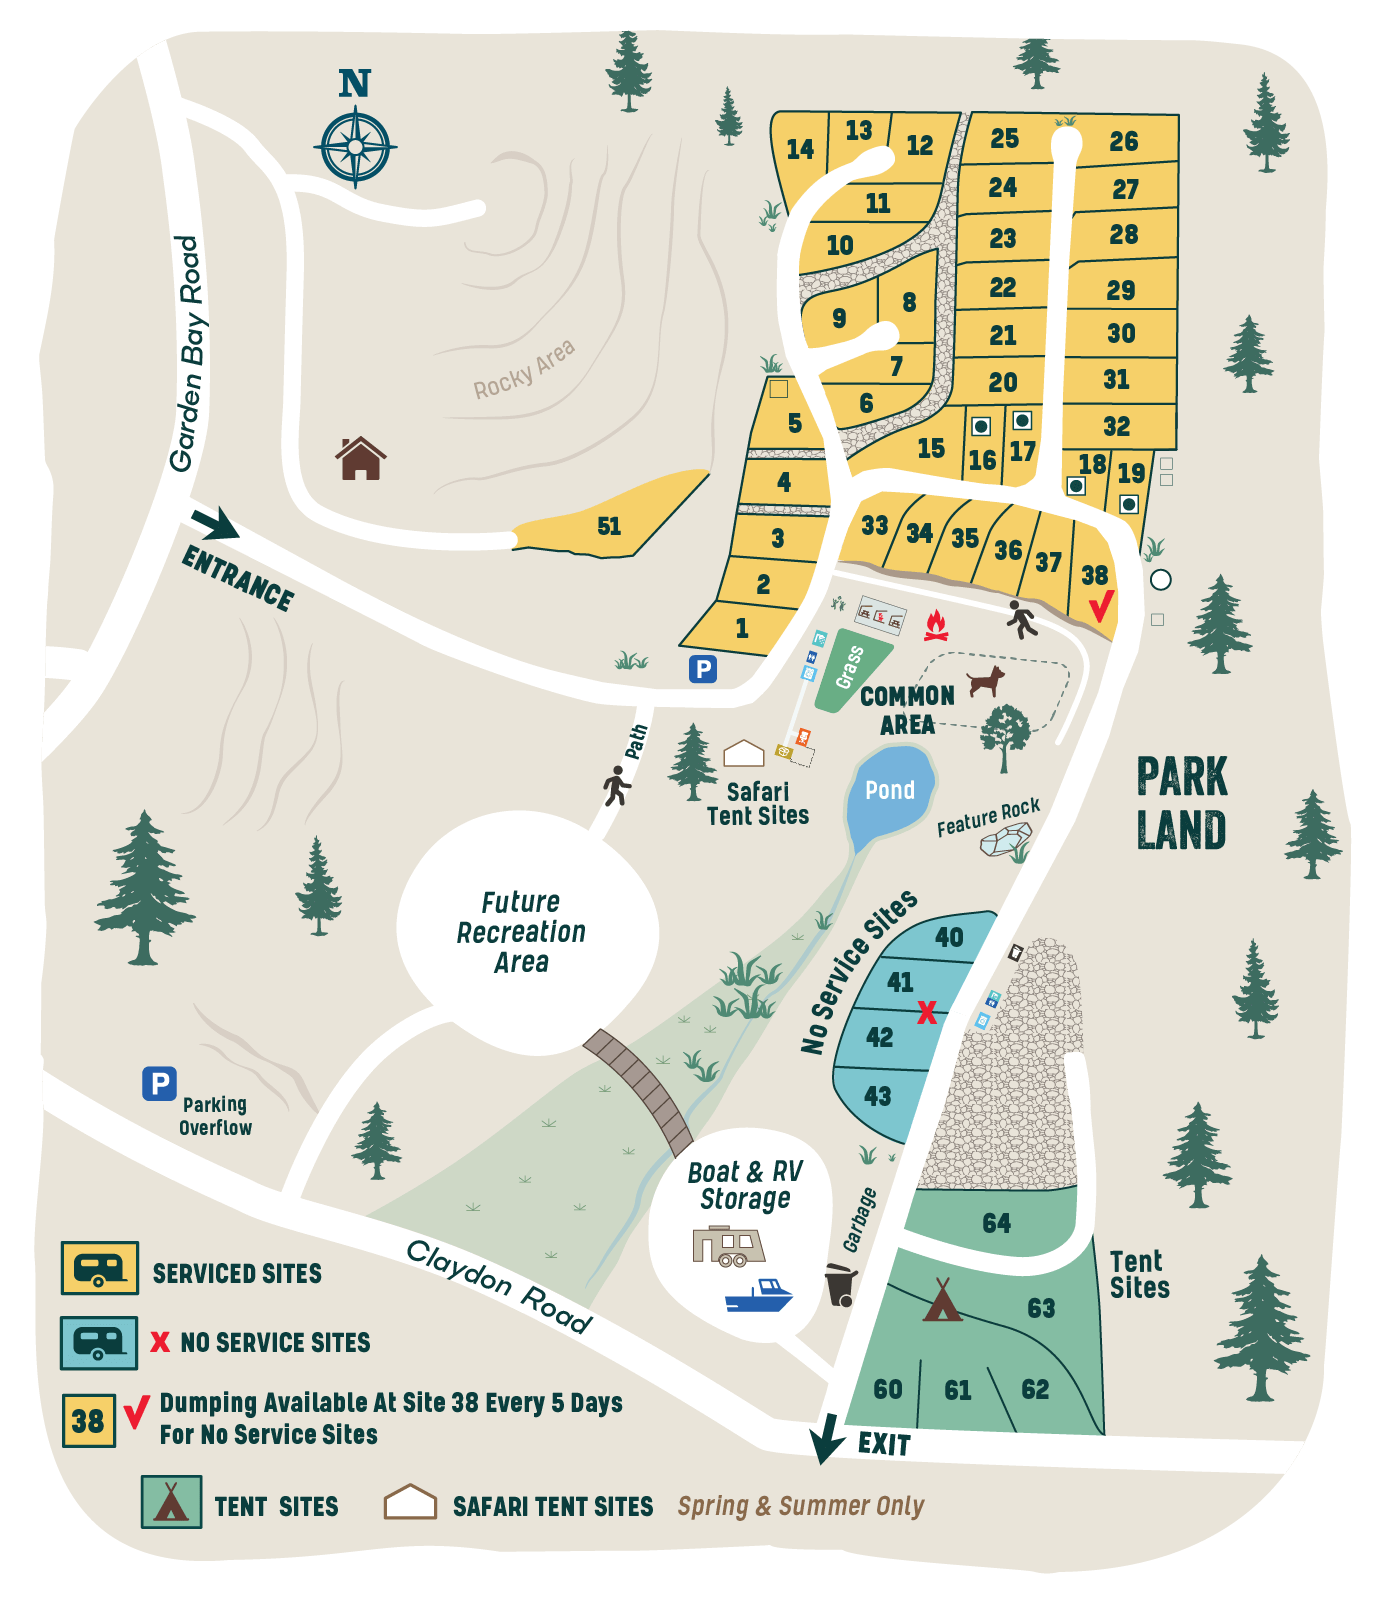 illustrated map of RV park and campground